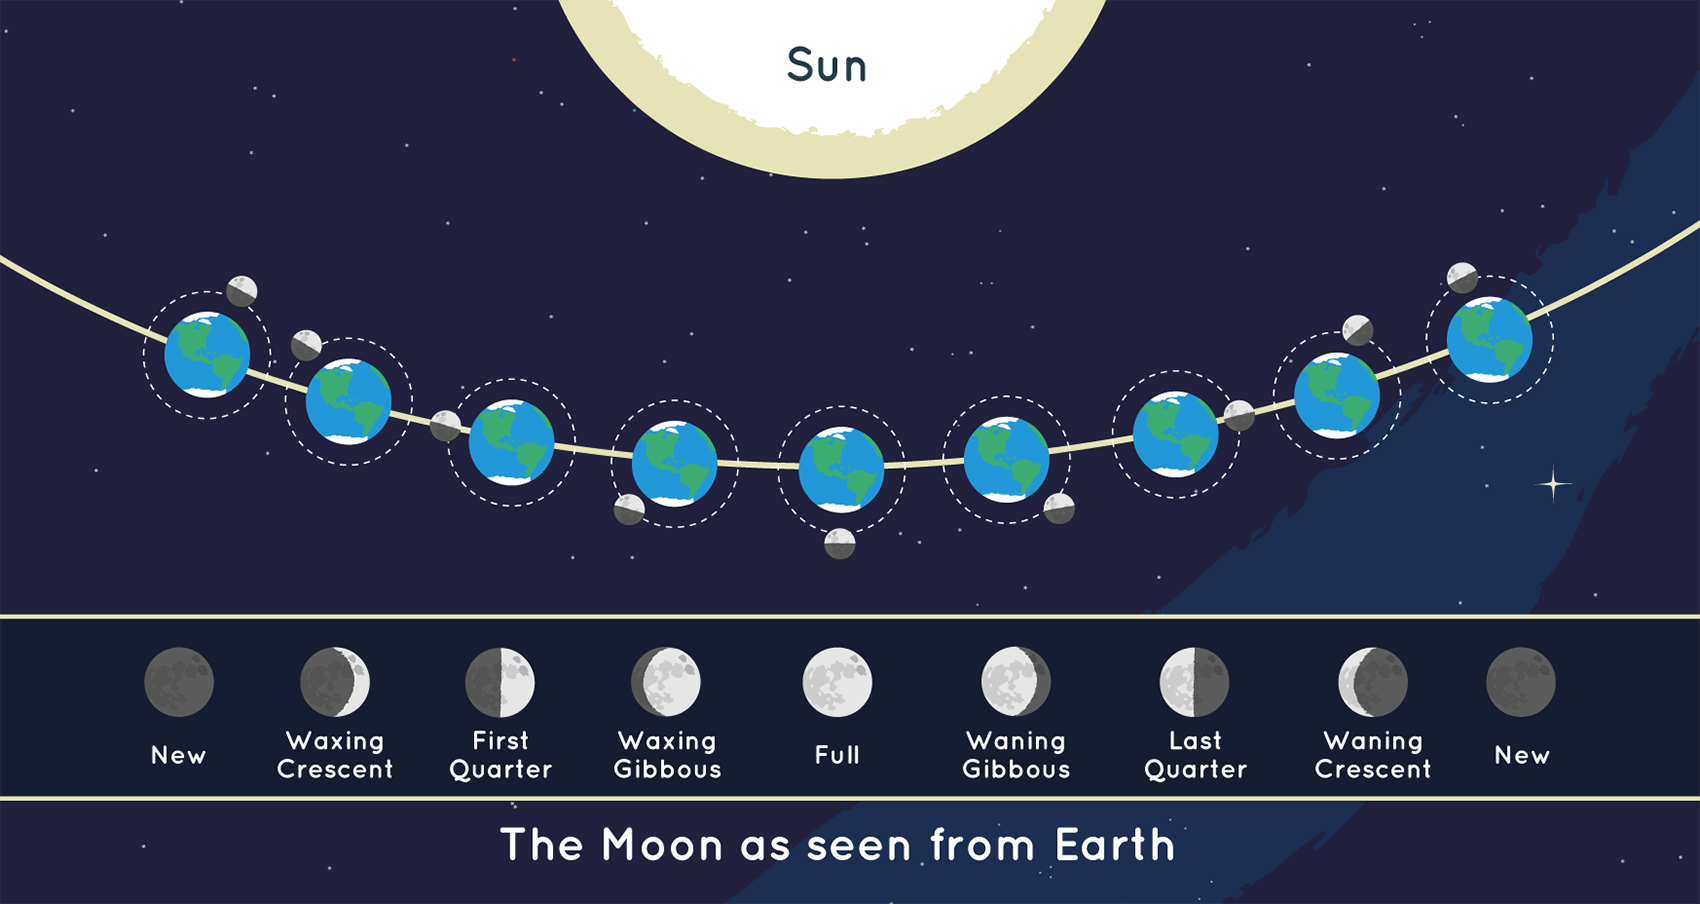 Position of Moon and Sun, matched with depictions of the Moon’s phases as seen from Earth’s viewpoint.